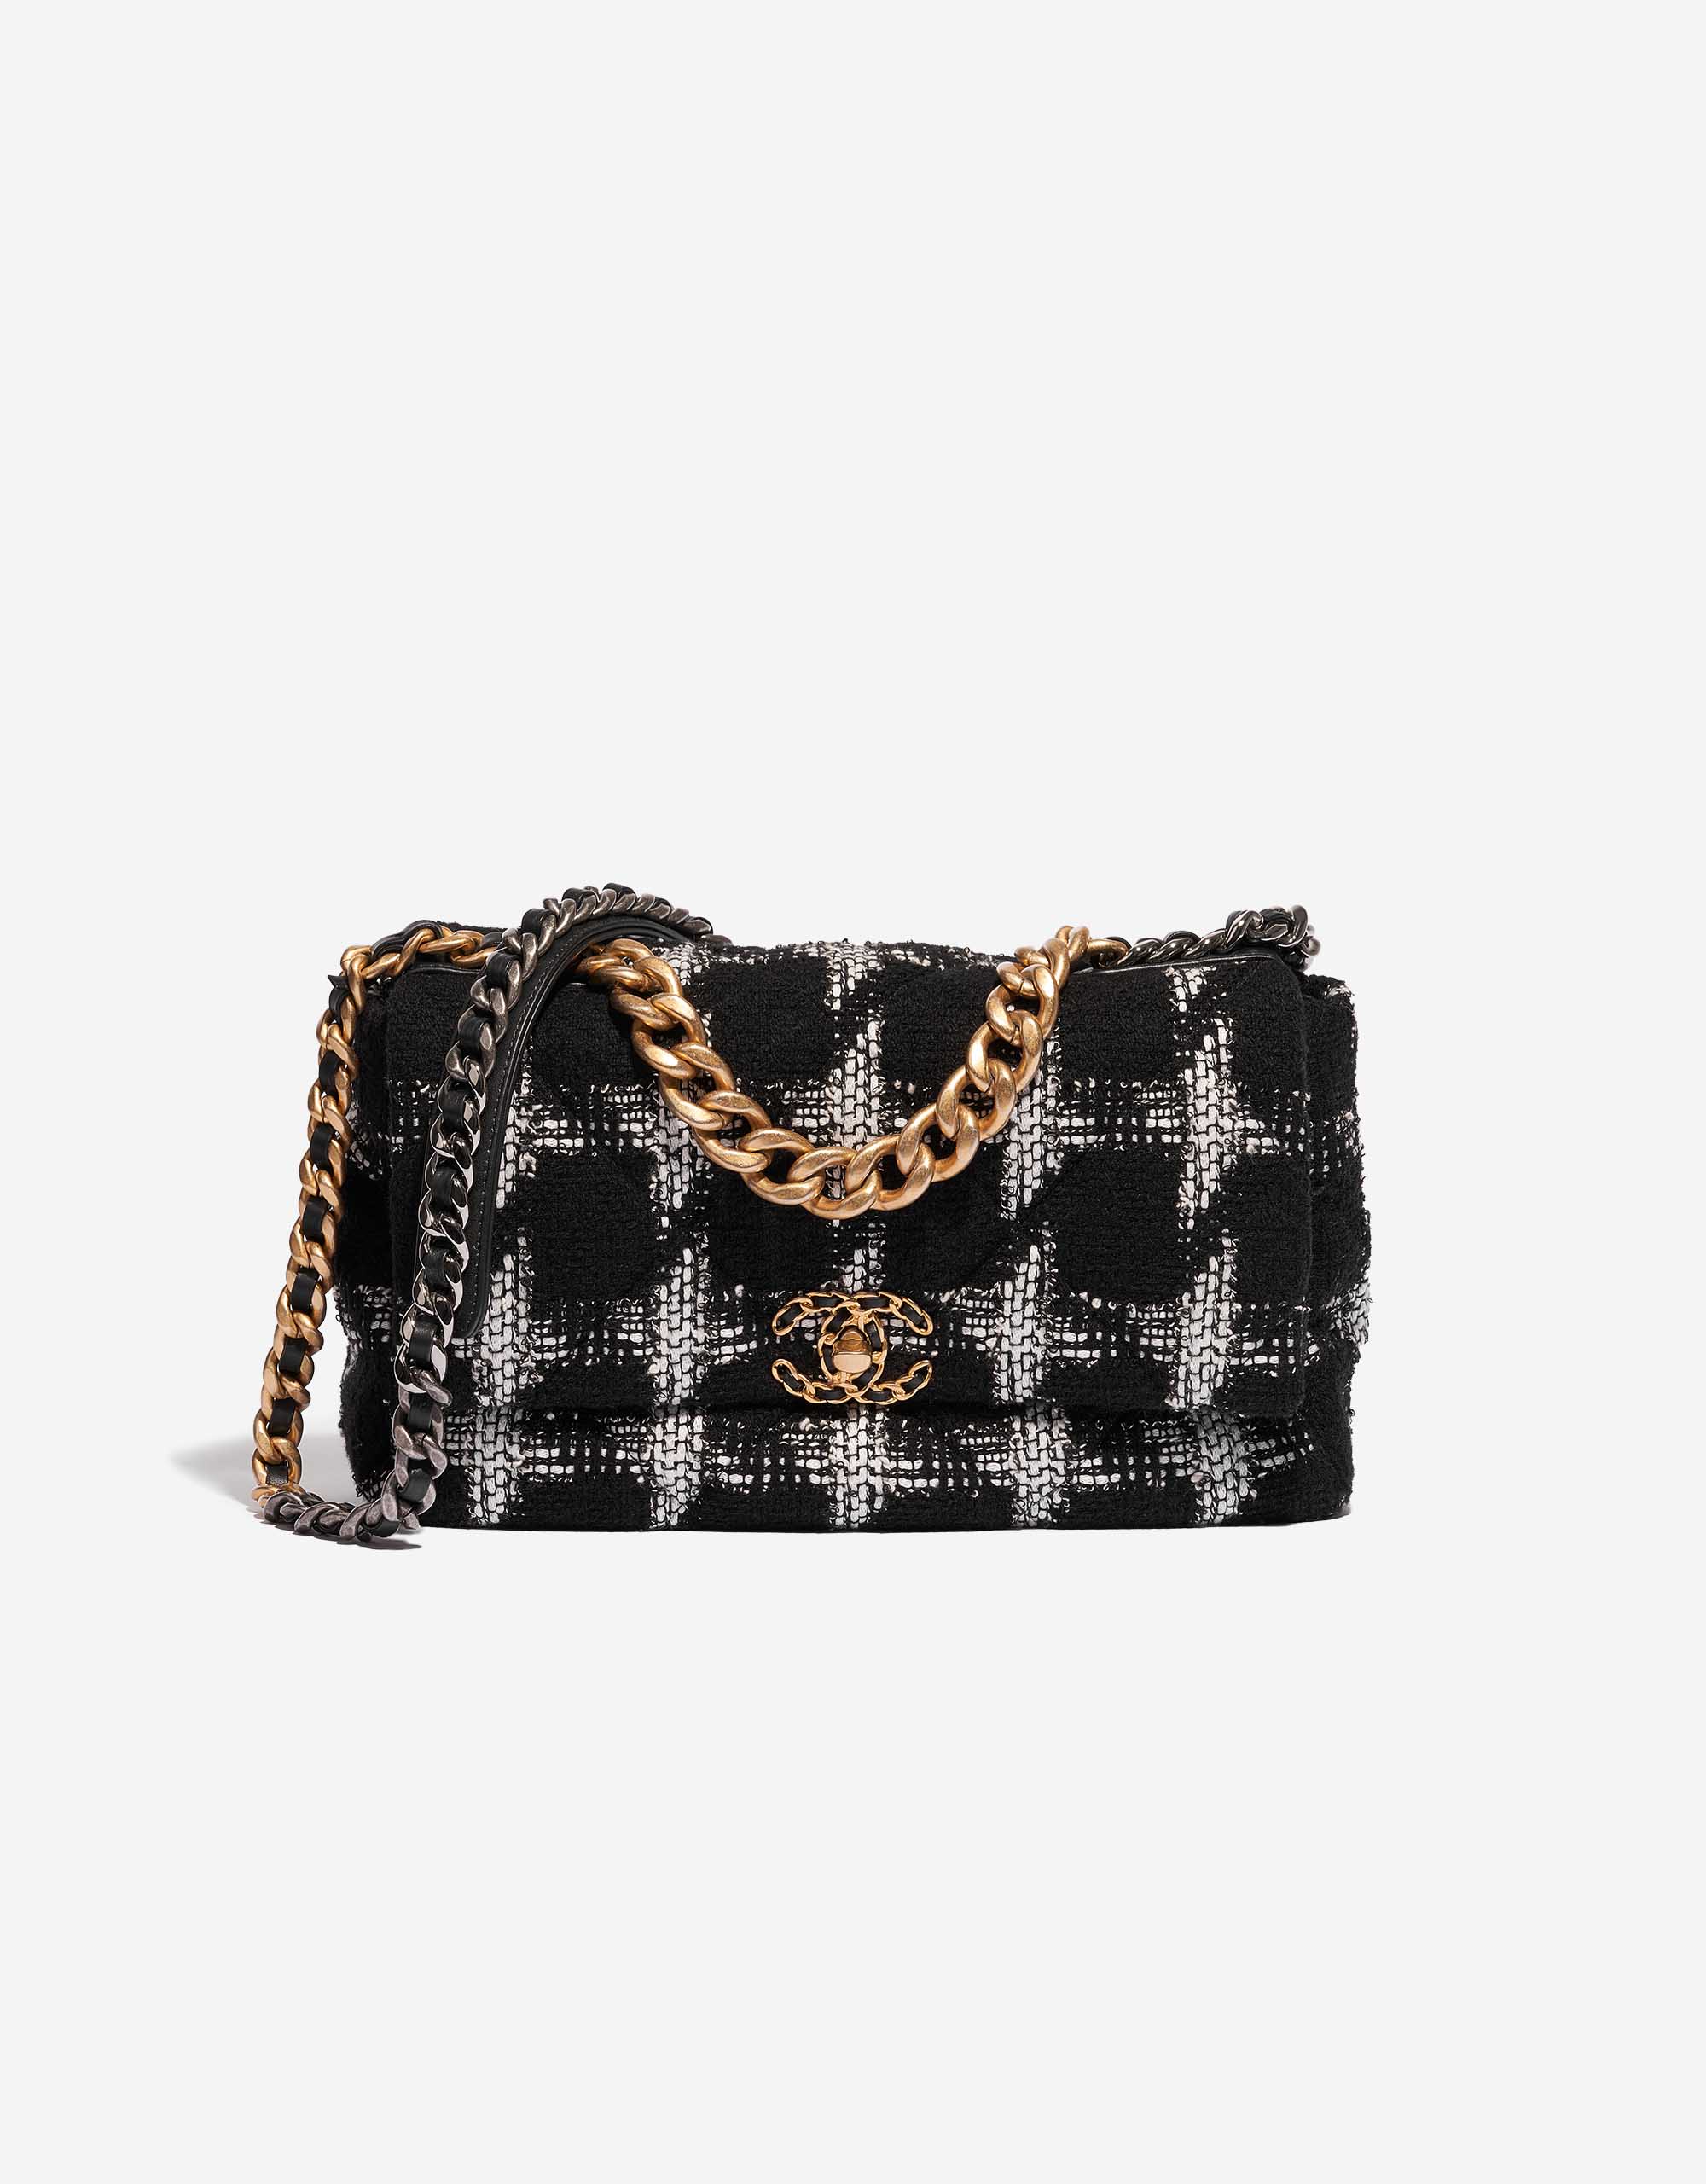 CHANEL CHANEL 19 Medium Flap Bag in 20S Black And White Ribbon Houndstooth  Tweed